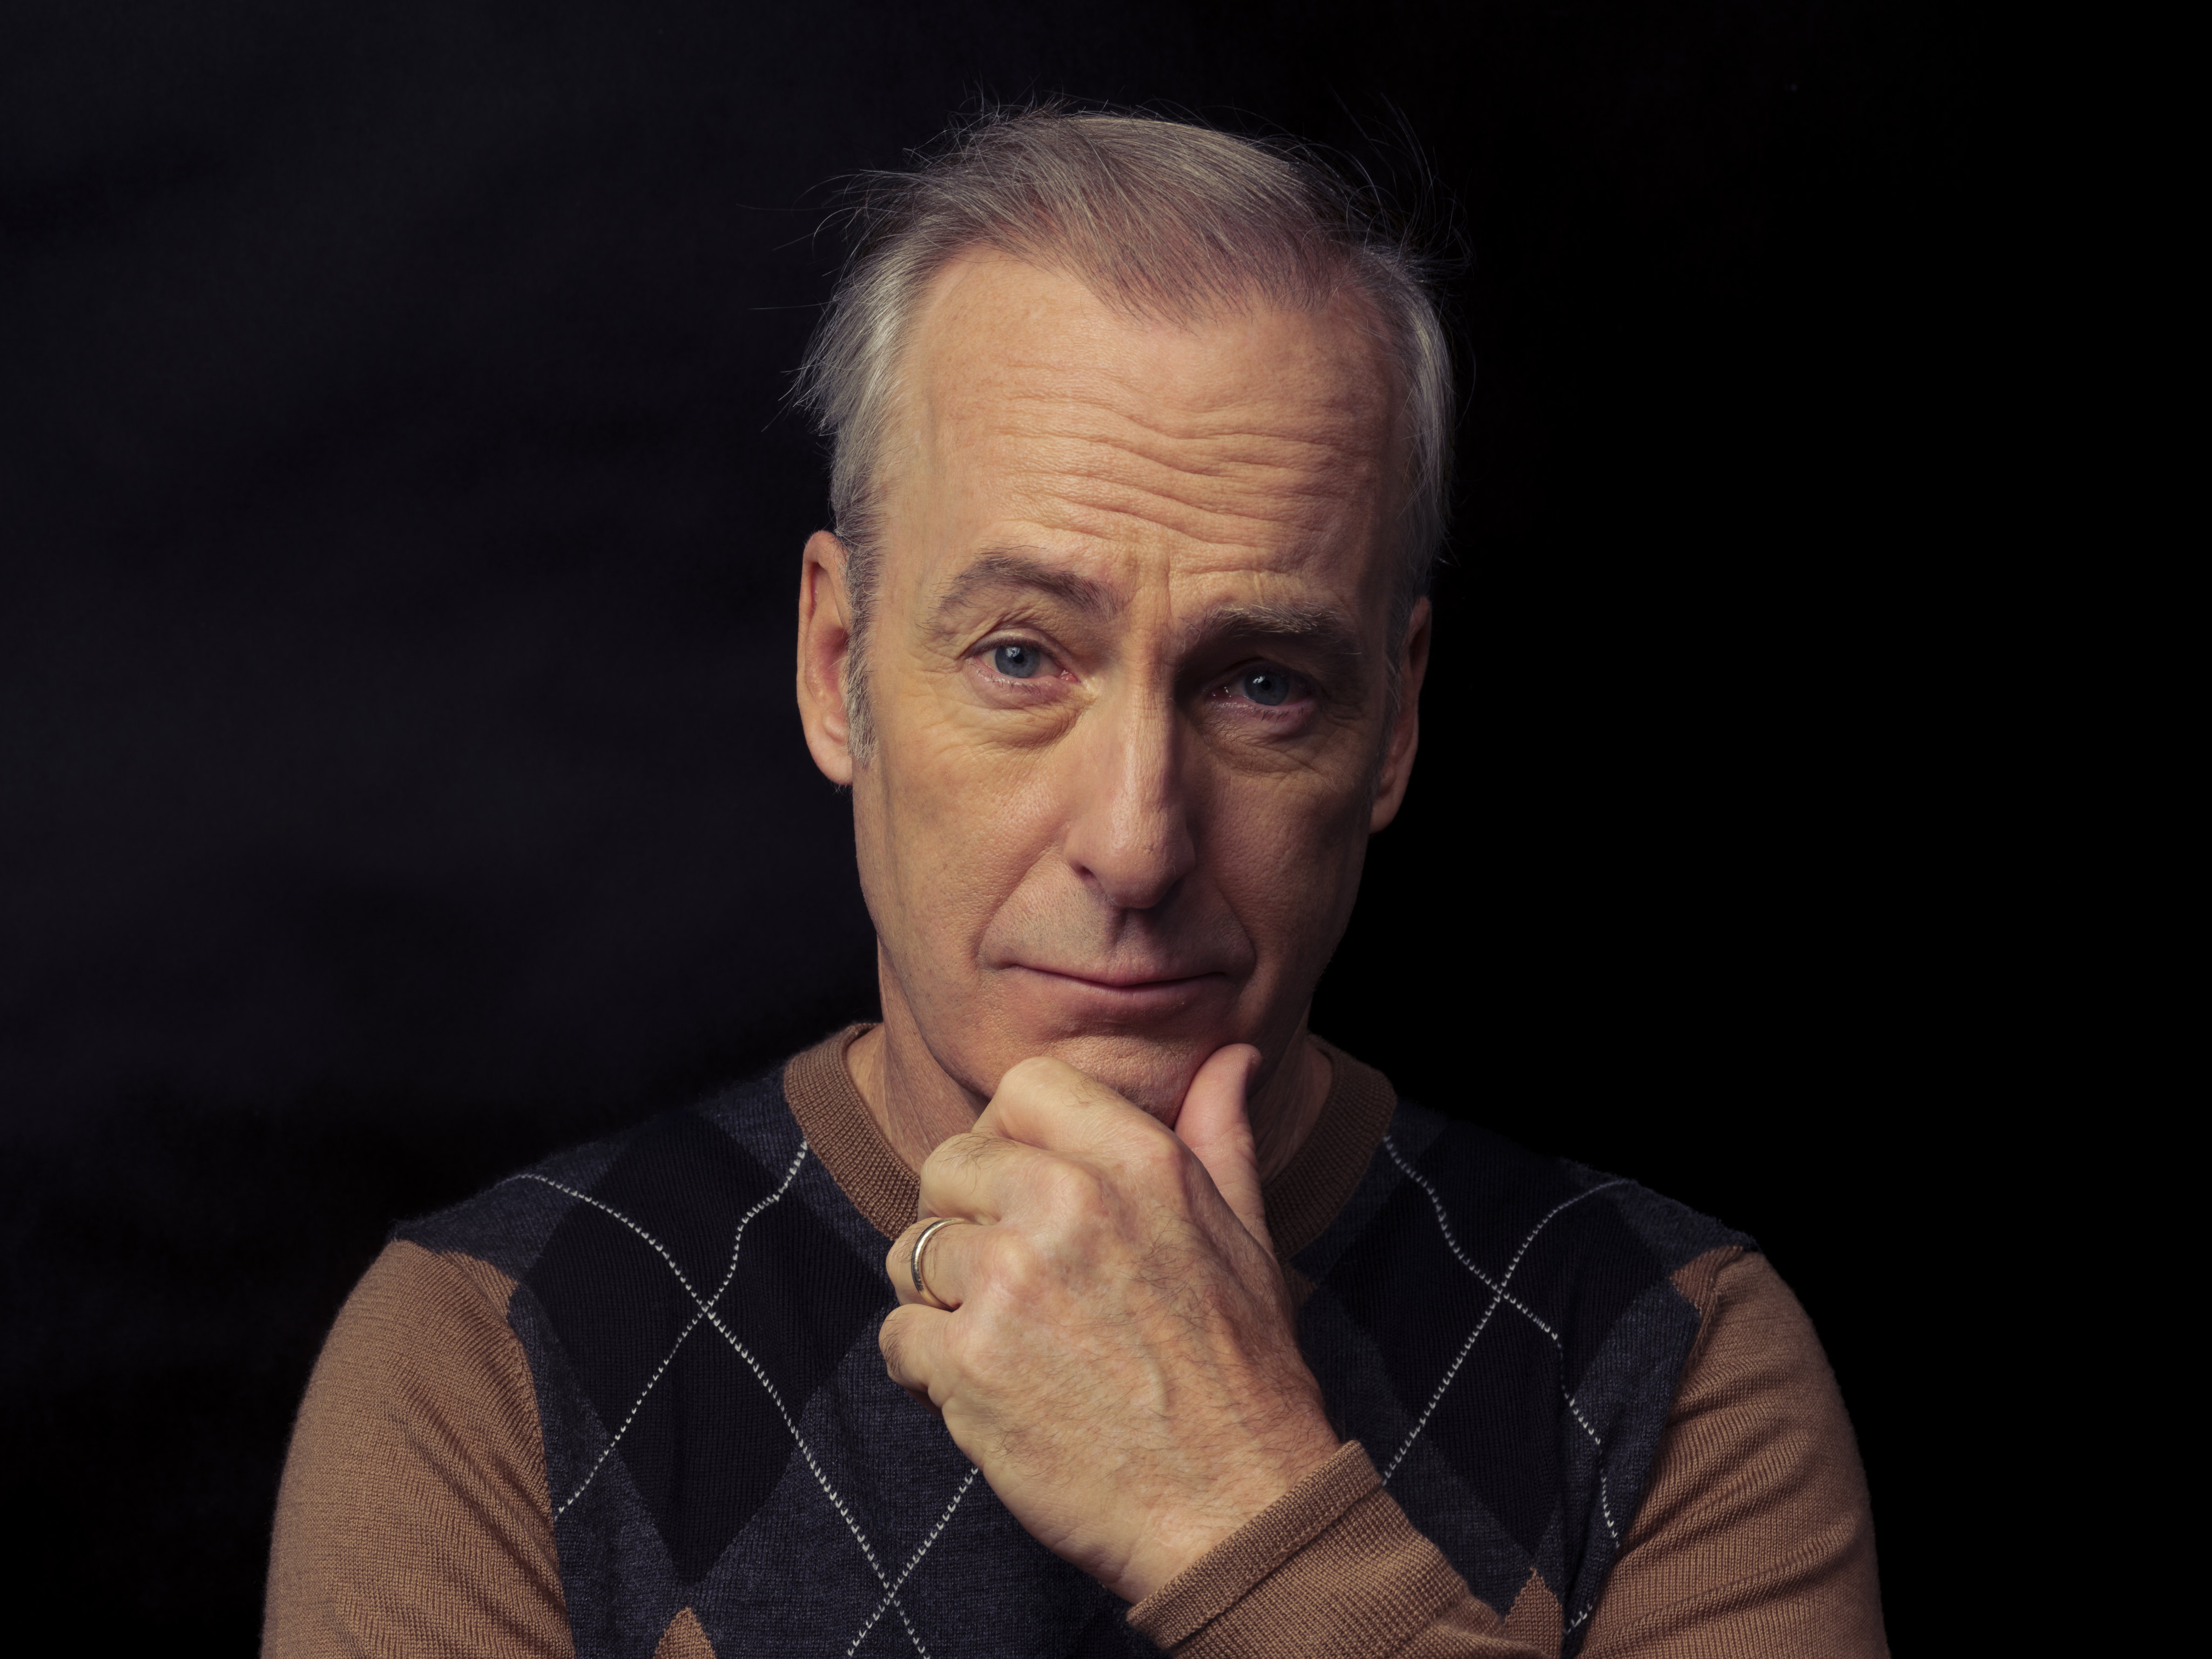 Bob Odenkirk poses for a portrait to promote his book “Zilot & Other Important Rhymes”. Photo: Drew Gurian/Invision/AP